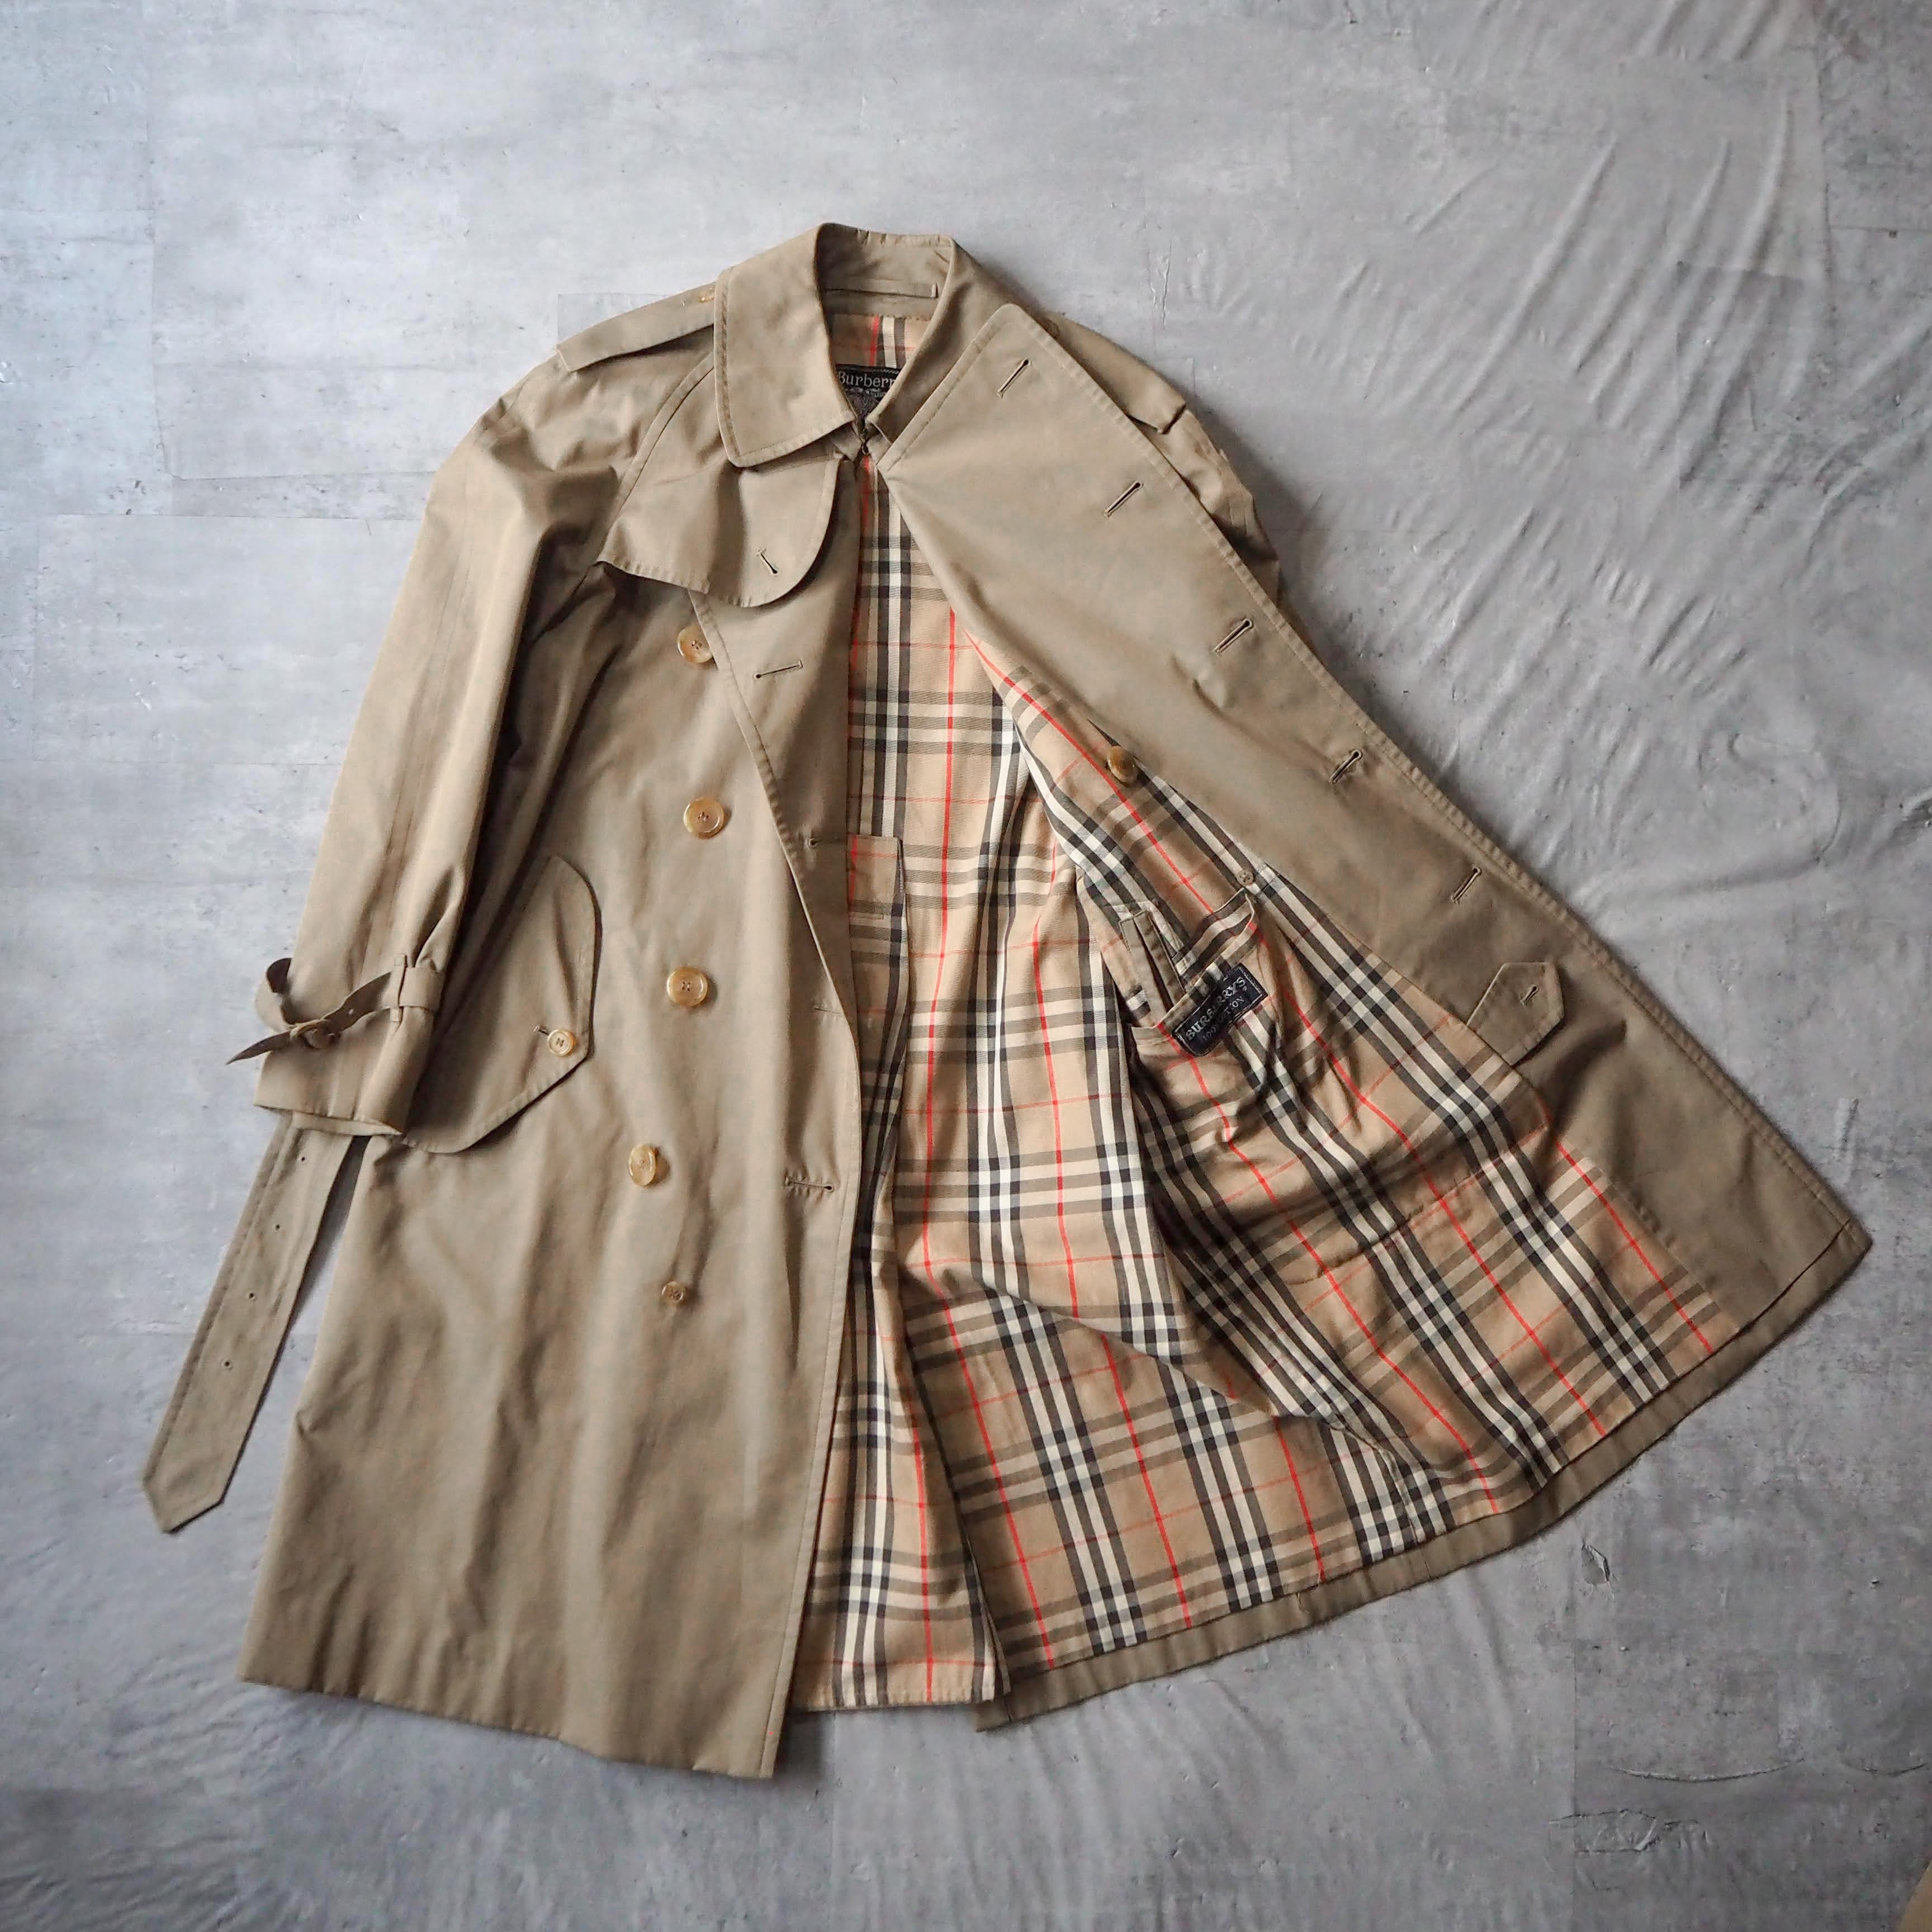 70s-80s “BURBERRYS” trench coat made in England 70年代 80年代 